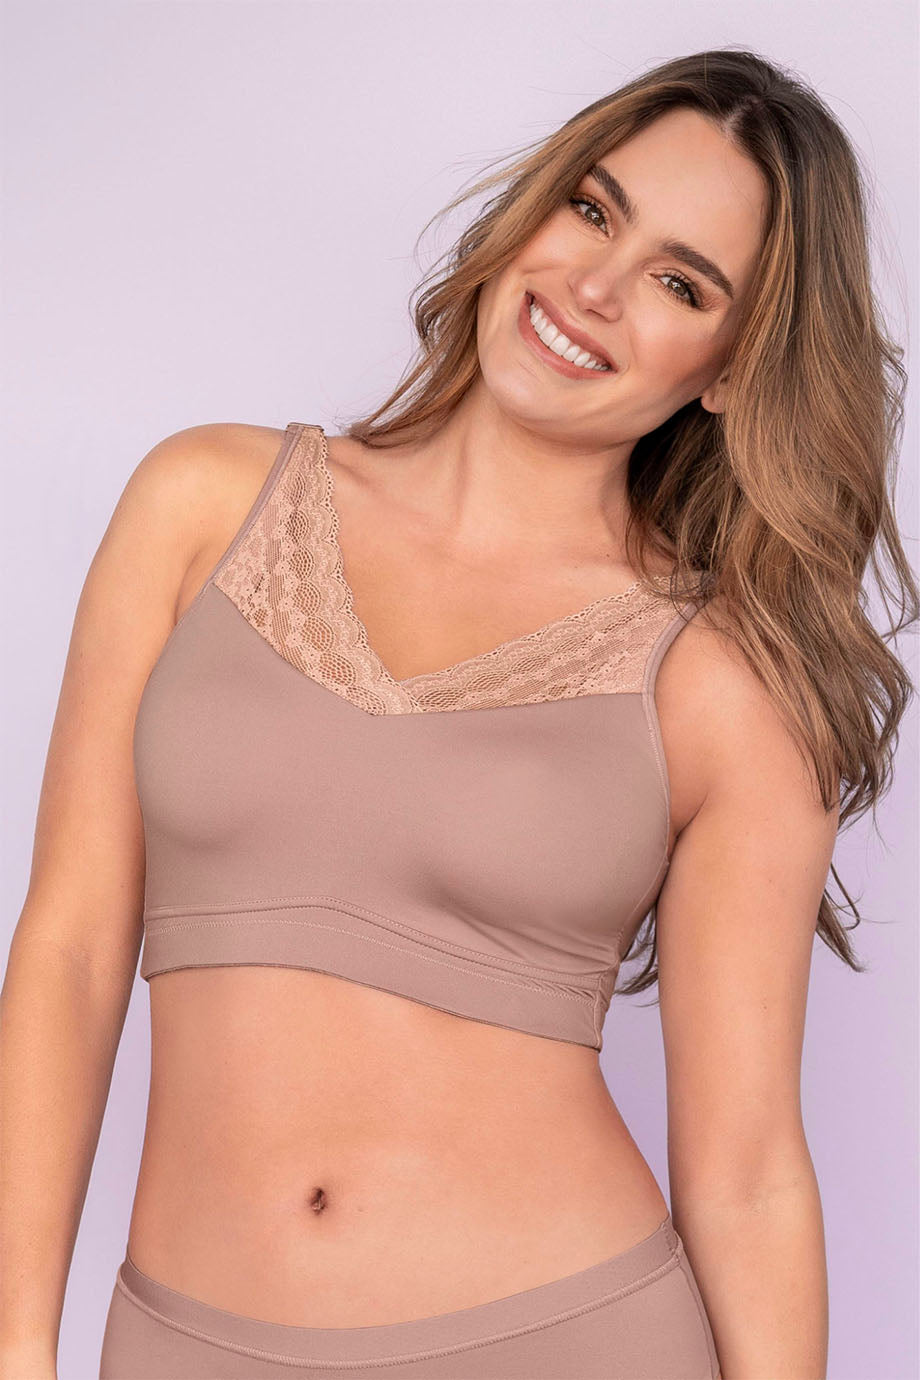 Wholesale bilateral mastectomy bras For Supportive Underwear